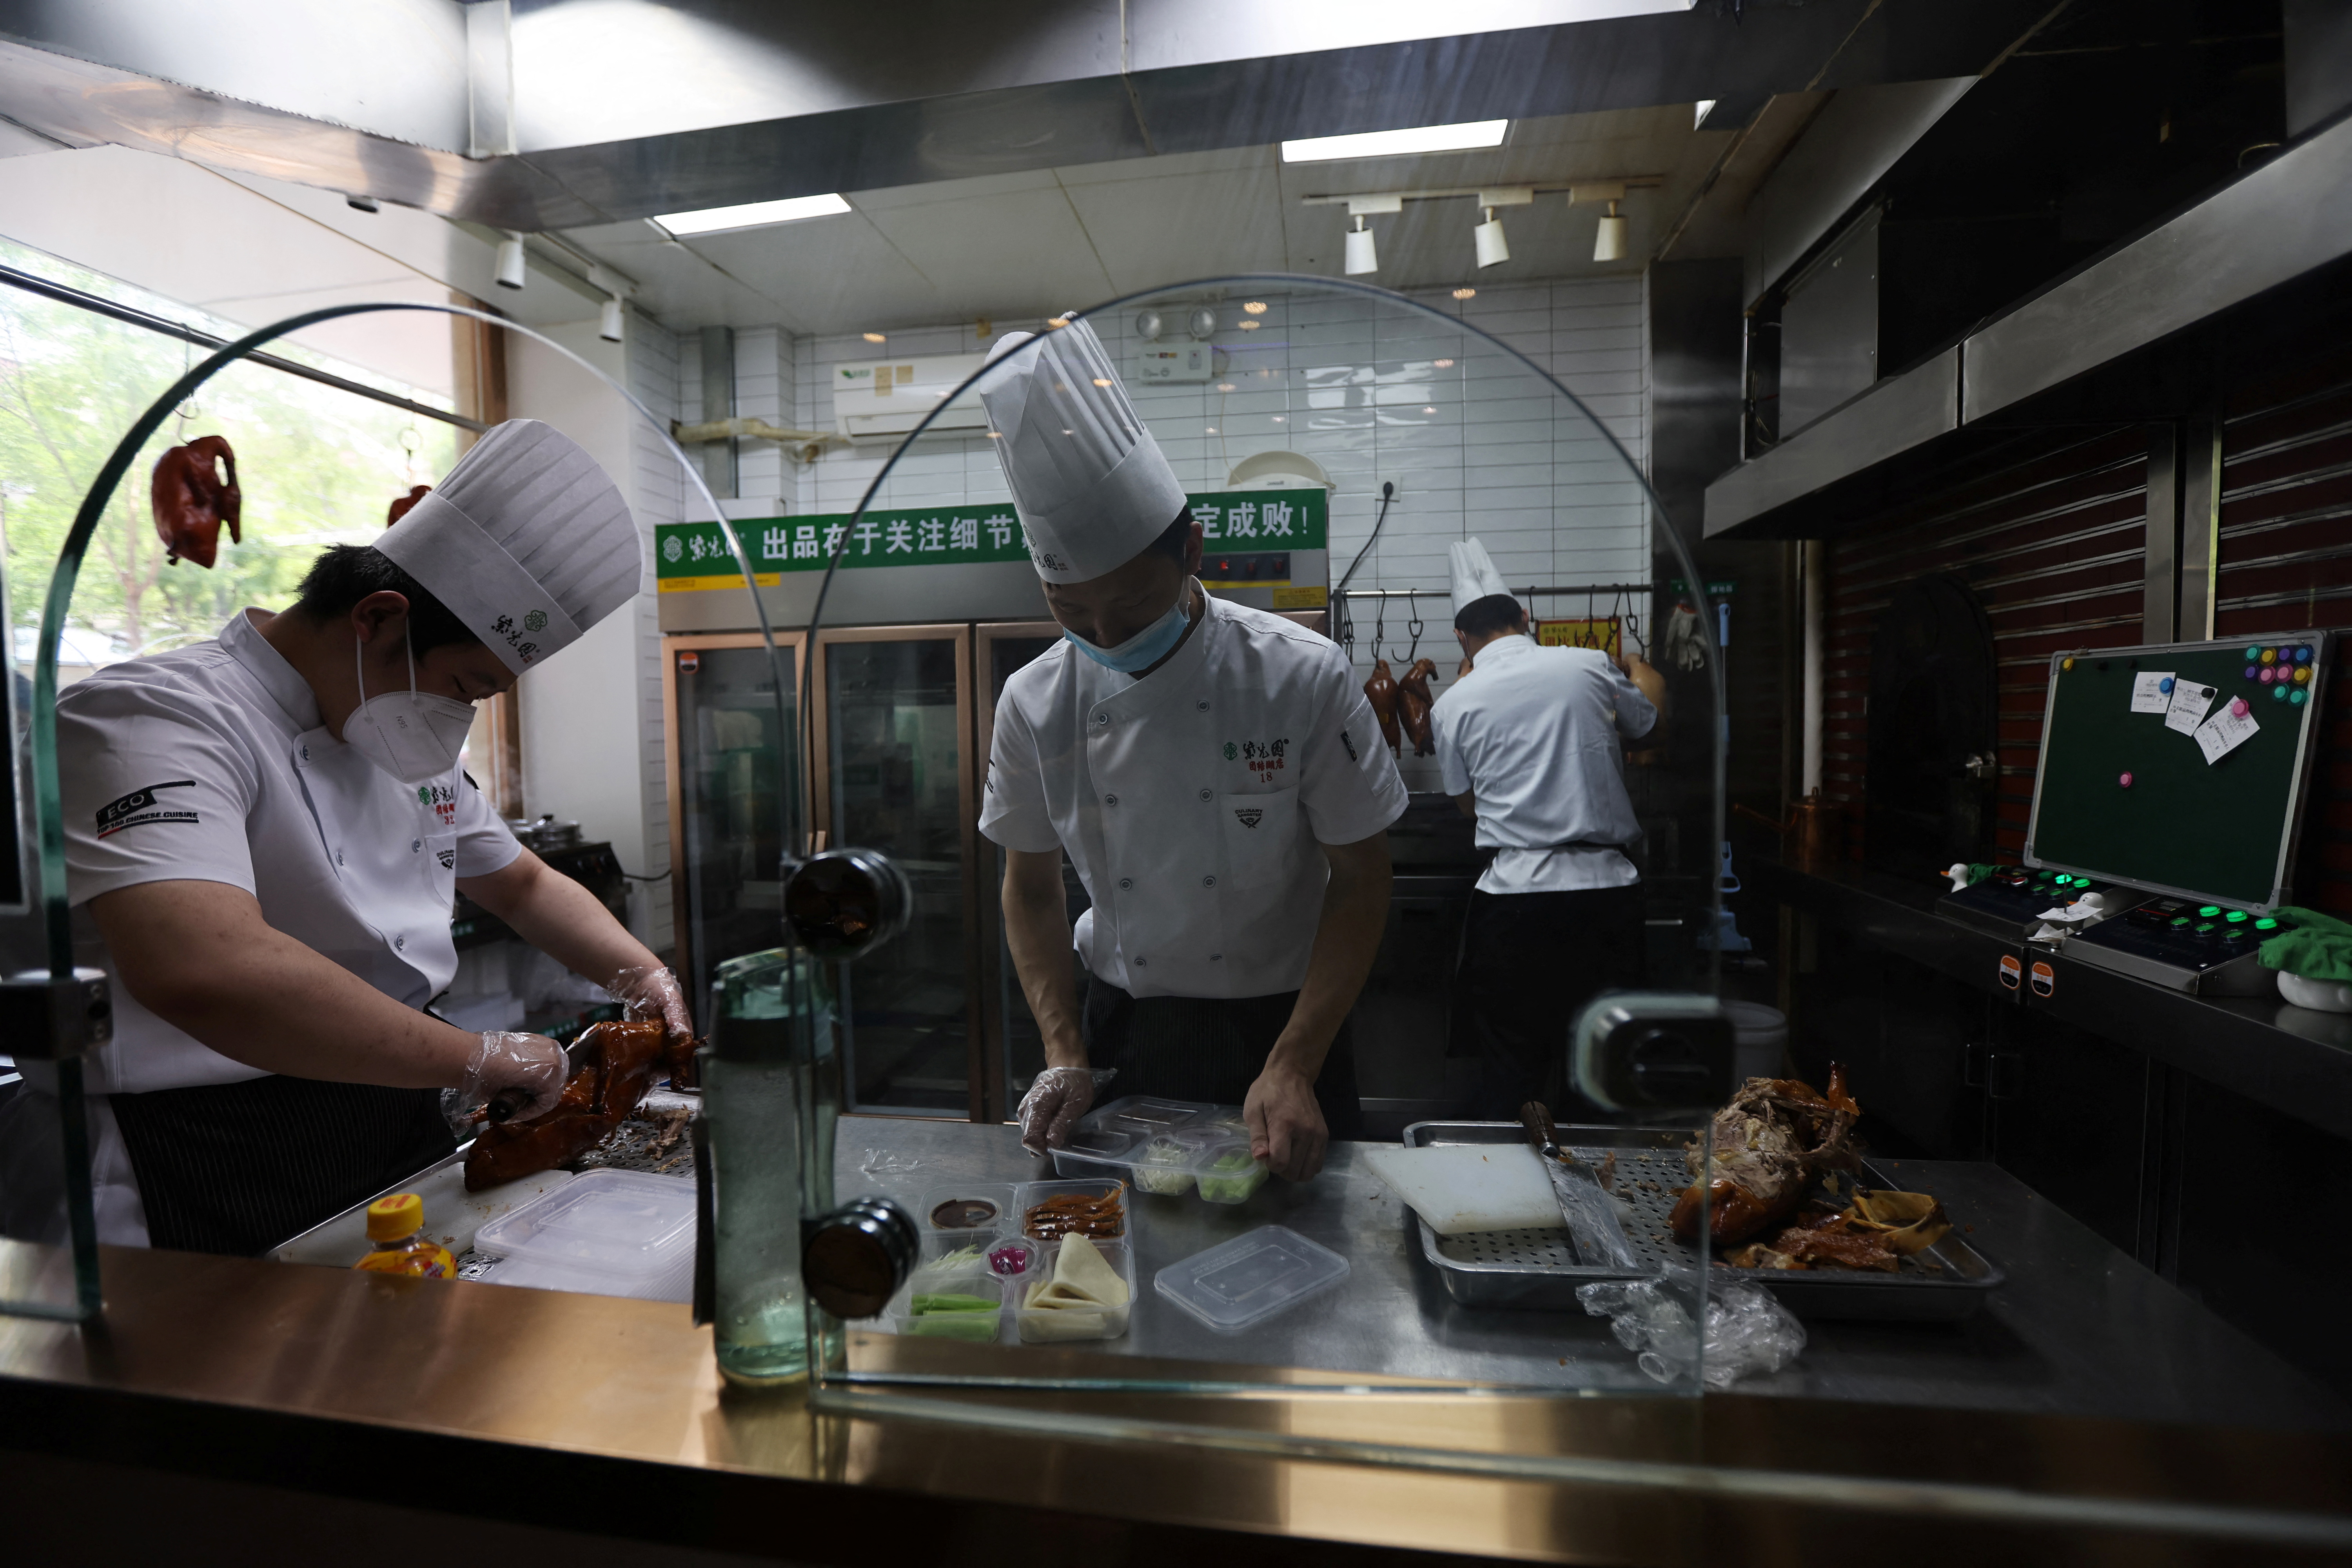 Restaurant prepares take-aways after the city banned dine-in services amid the COVID-19 outbreak in Beijing